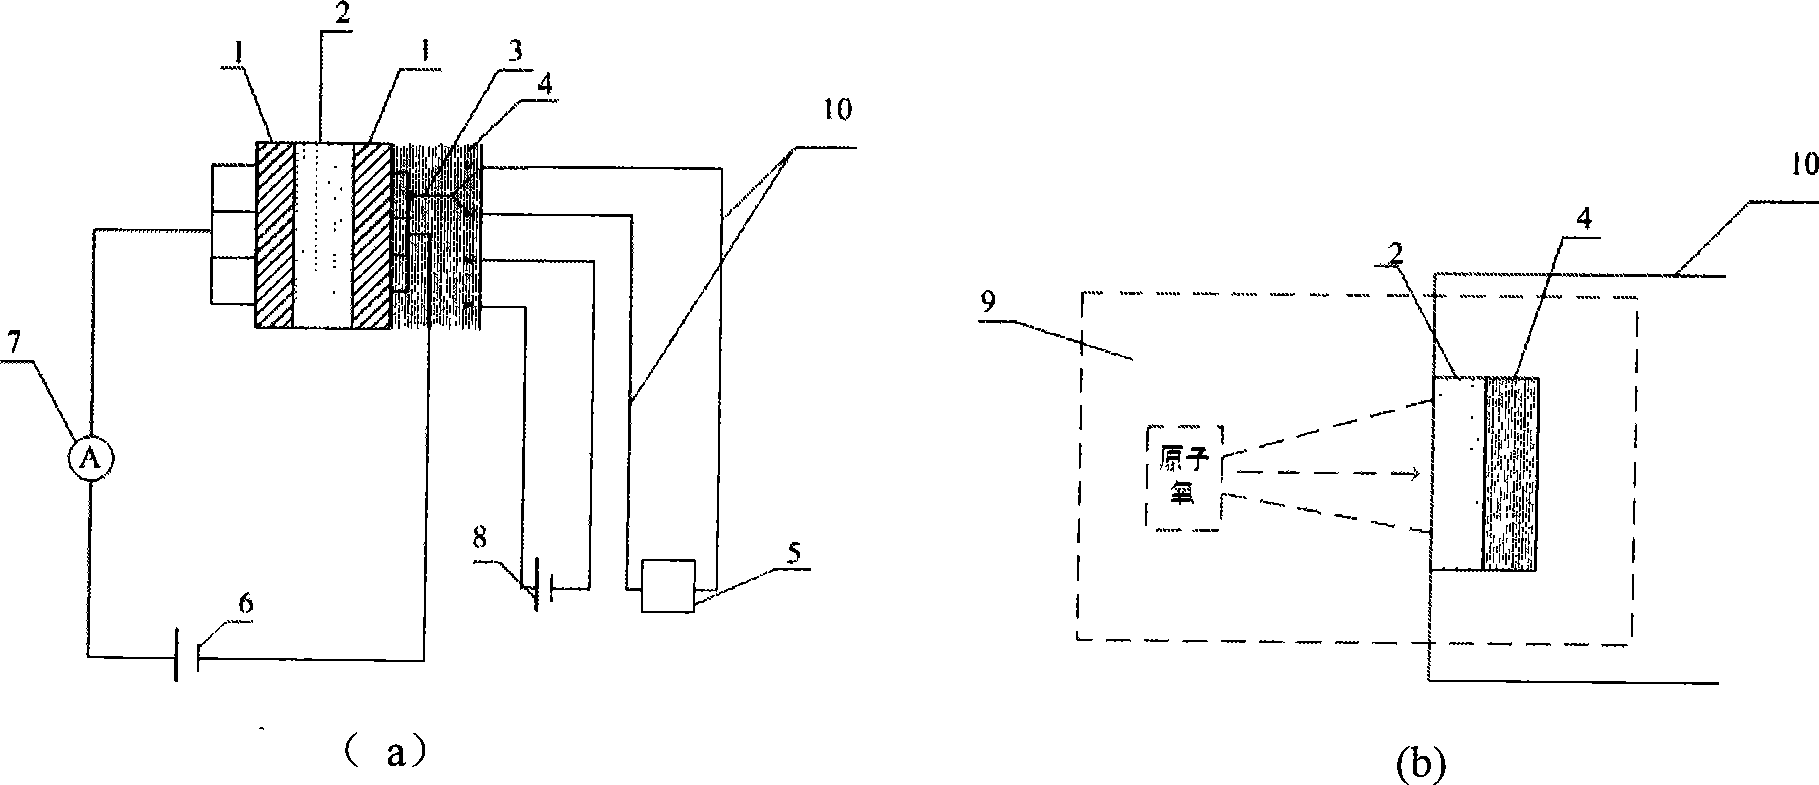 Repeatedly-usable atomic oxygen probe and detection system